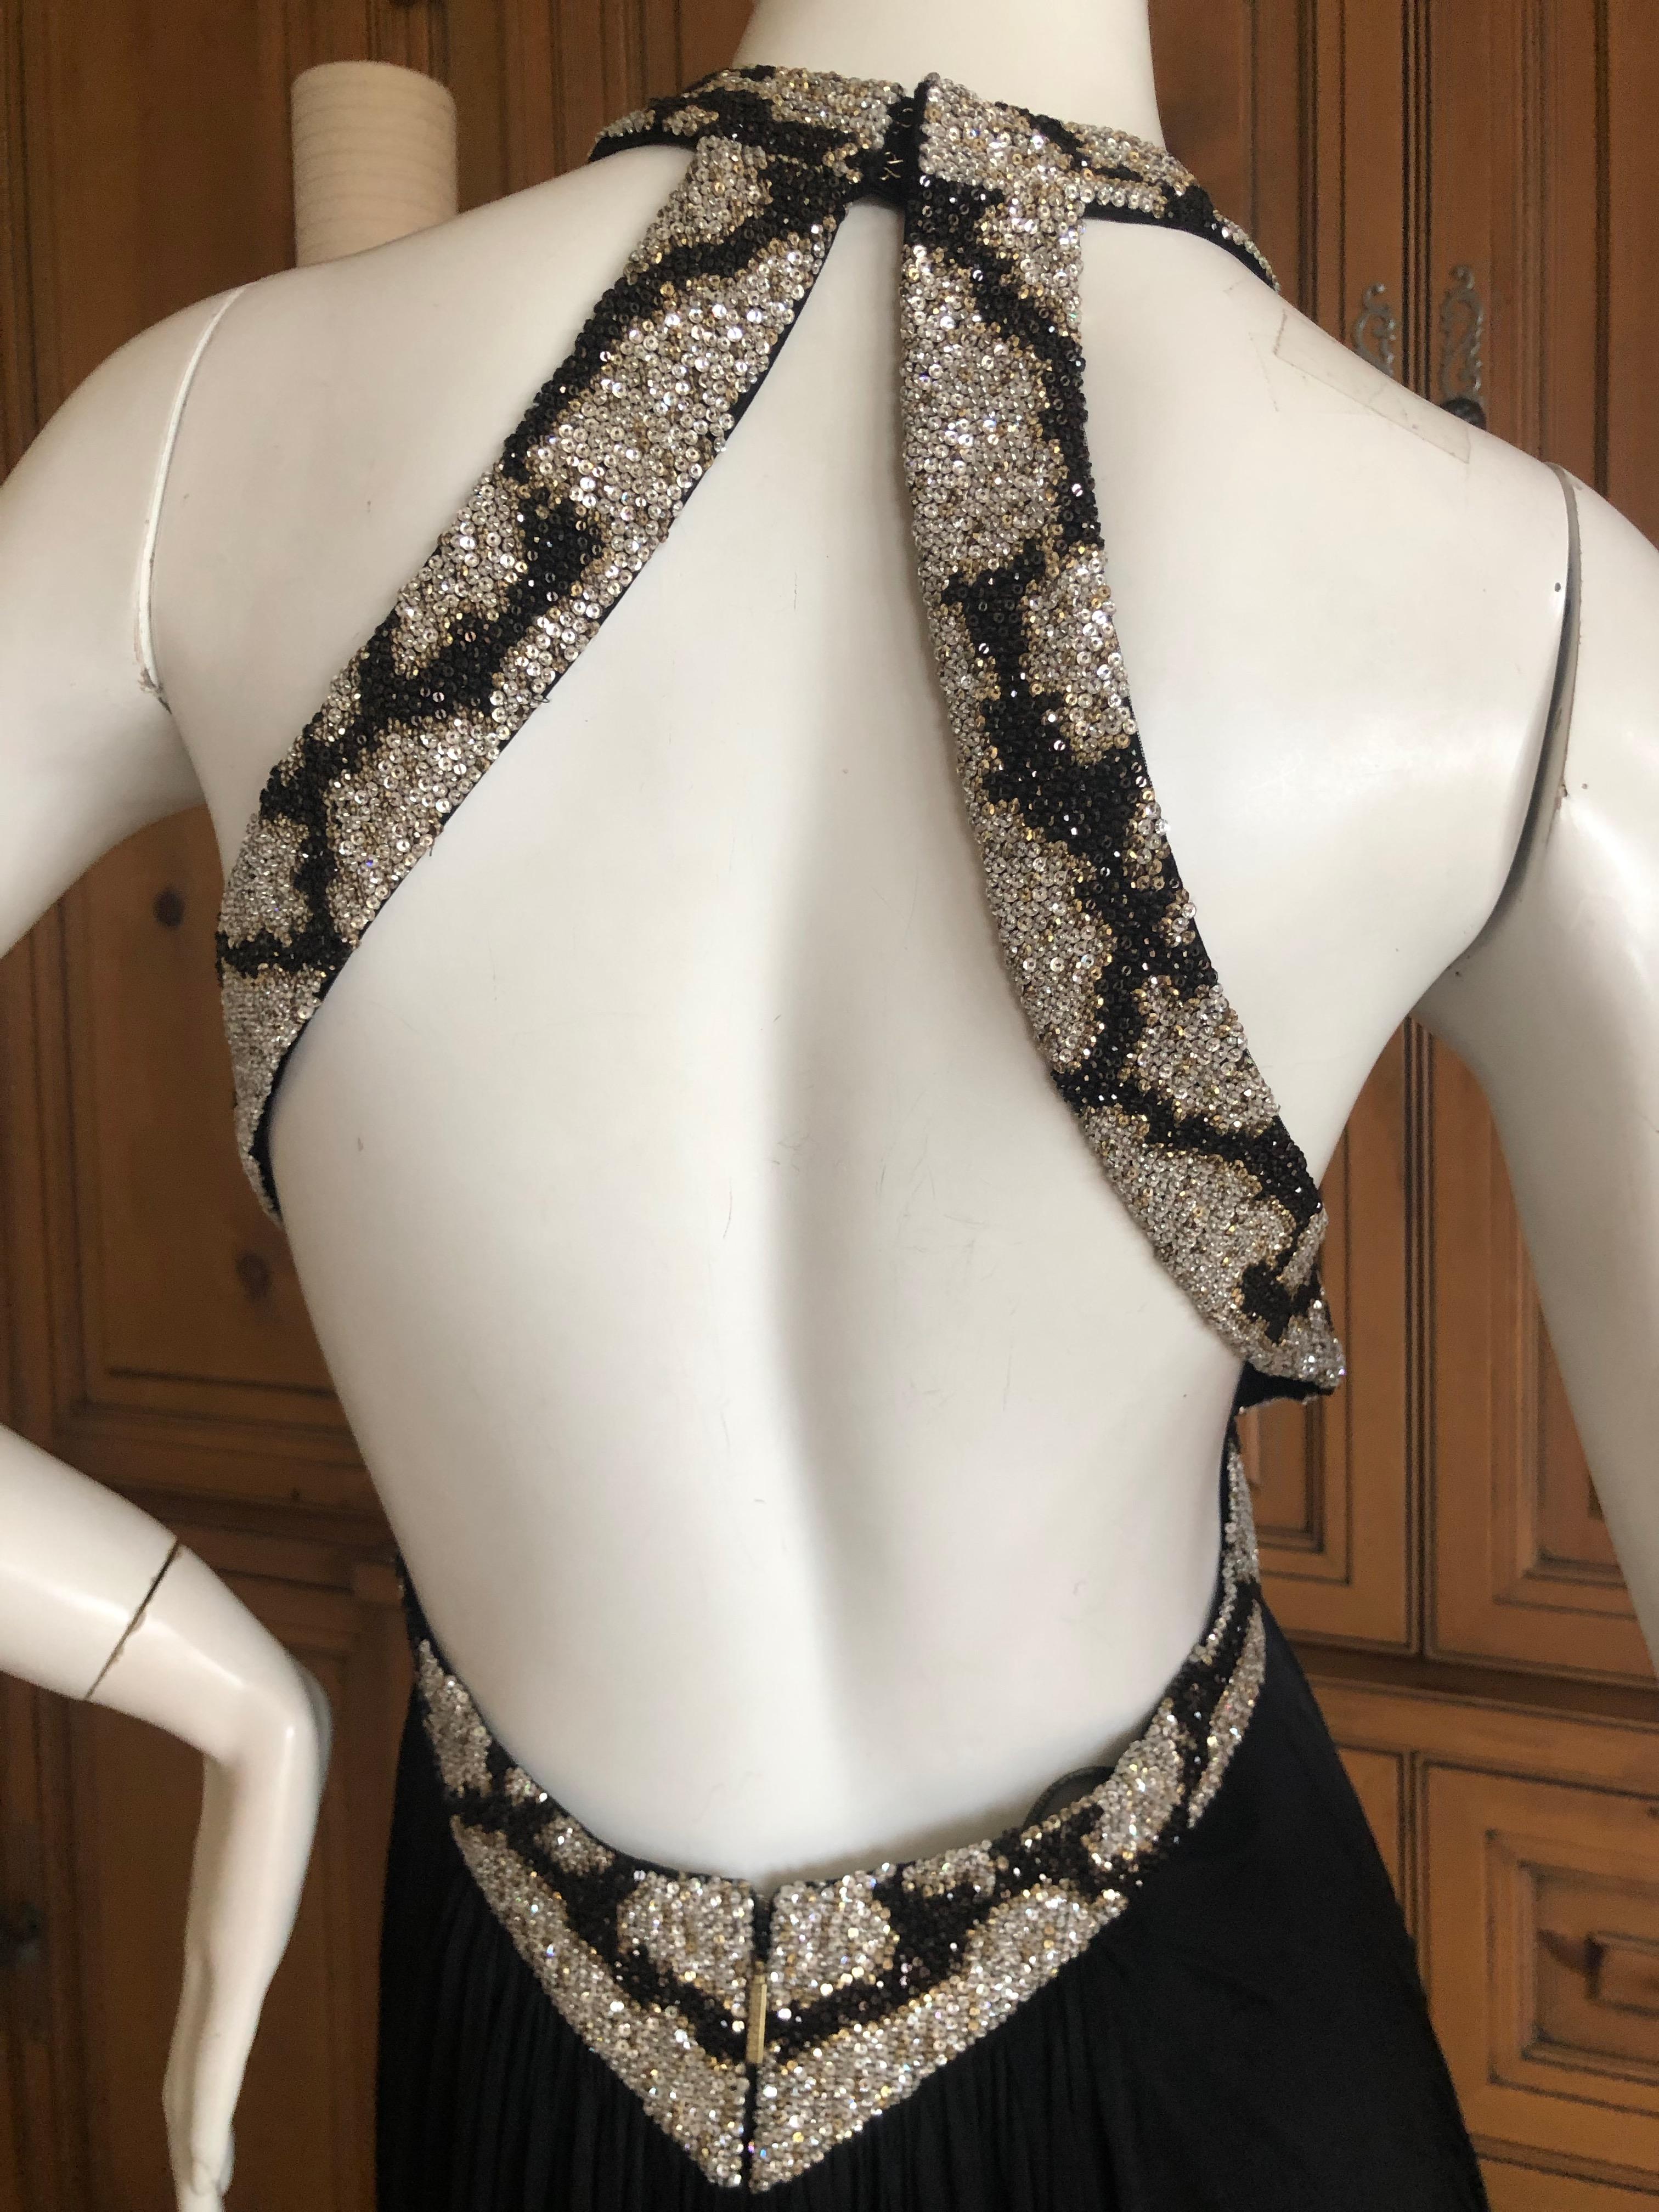 Roberto Cavalli Sexyback Black Evening Dress w Swarovski Crystal Beaded Trim by Peter Dundas.
This is so pretty, with reptile pattern in thousands of shiney Swarovski crystal beads.
Size 42
 Bust 36